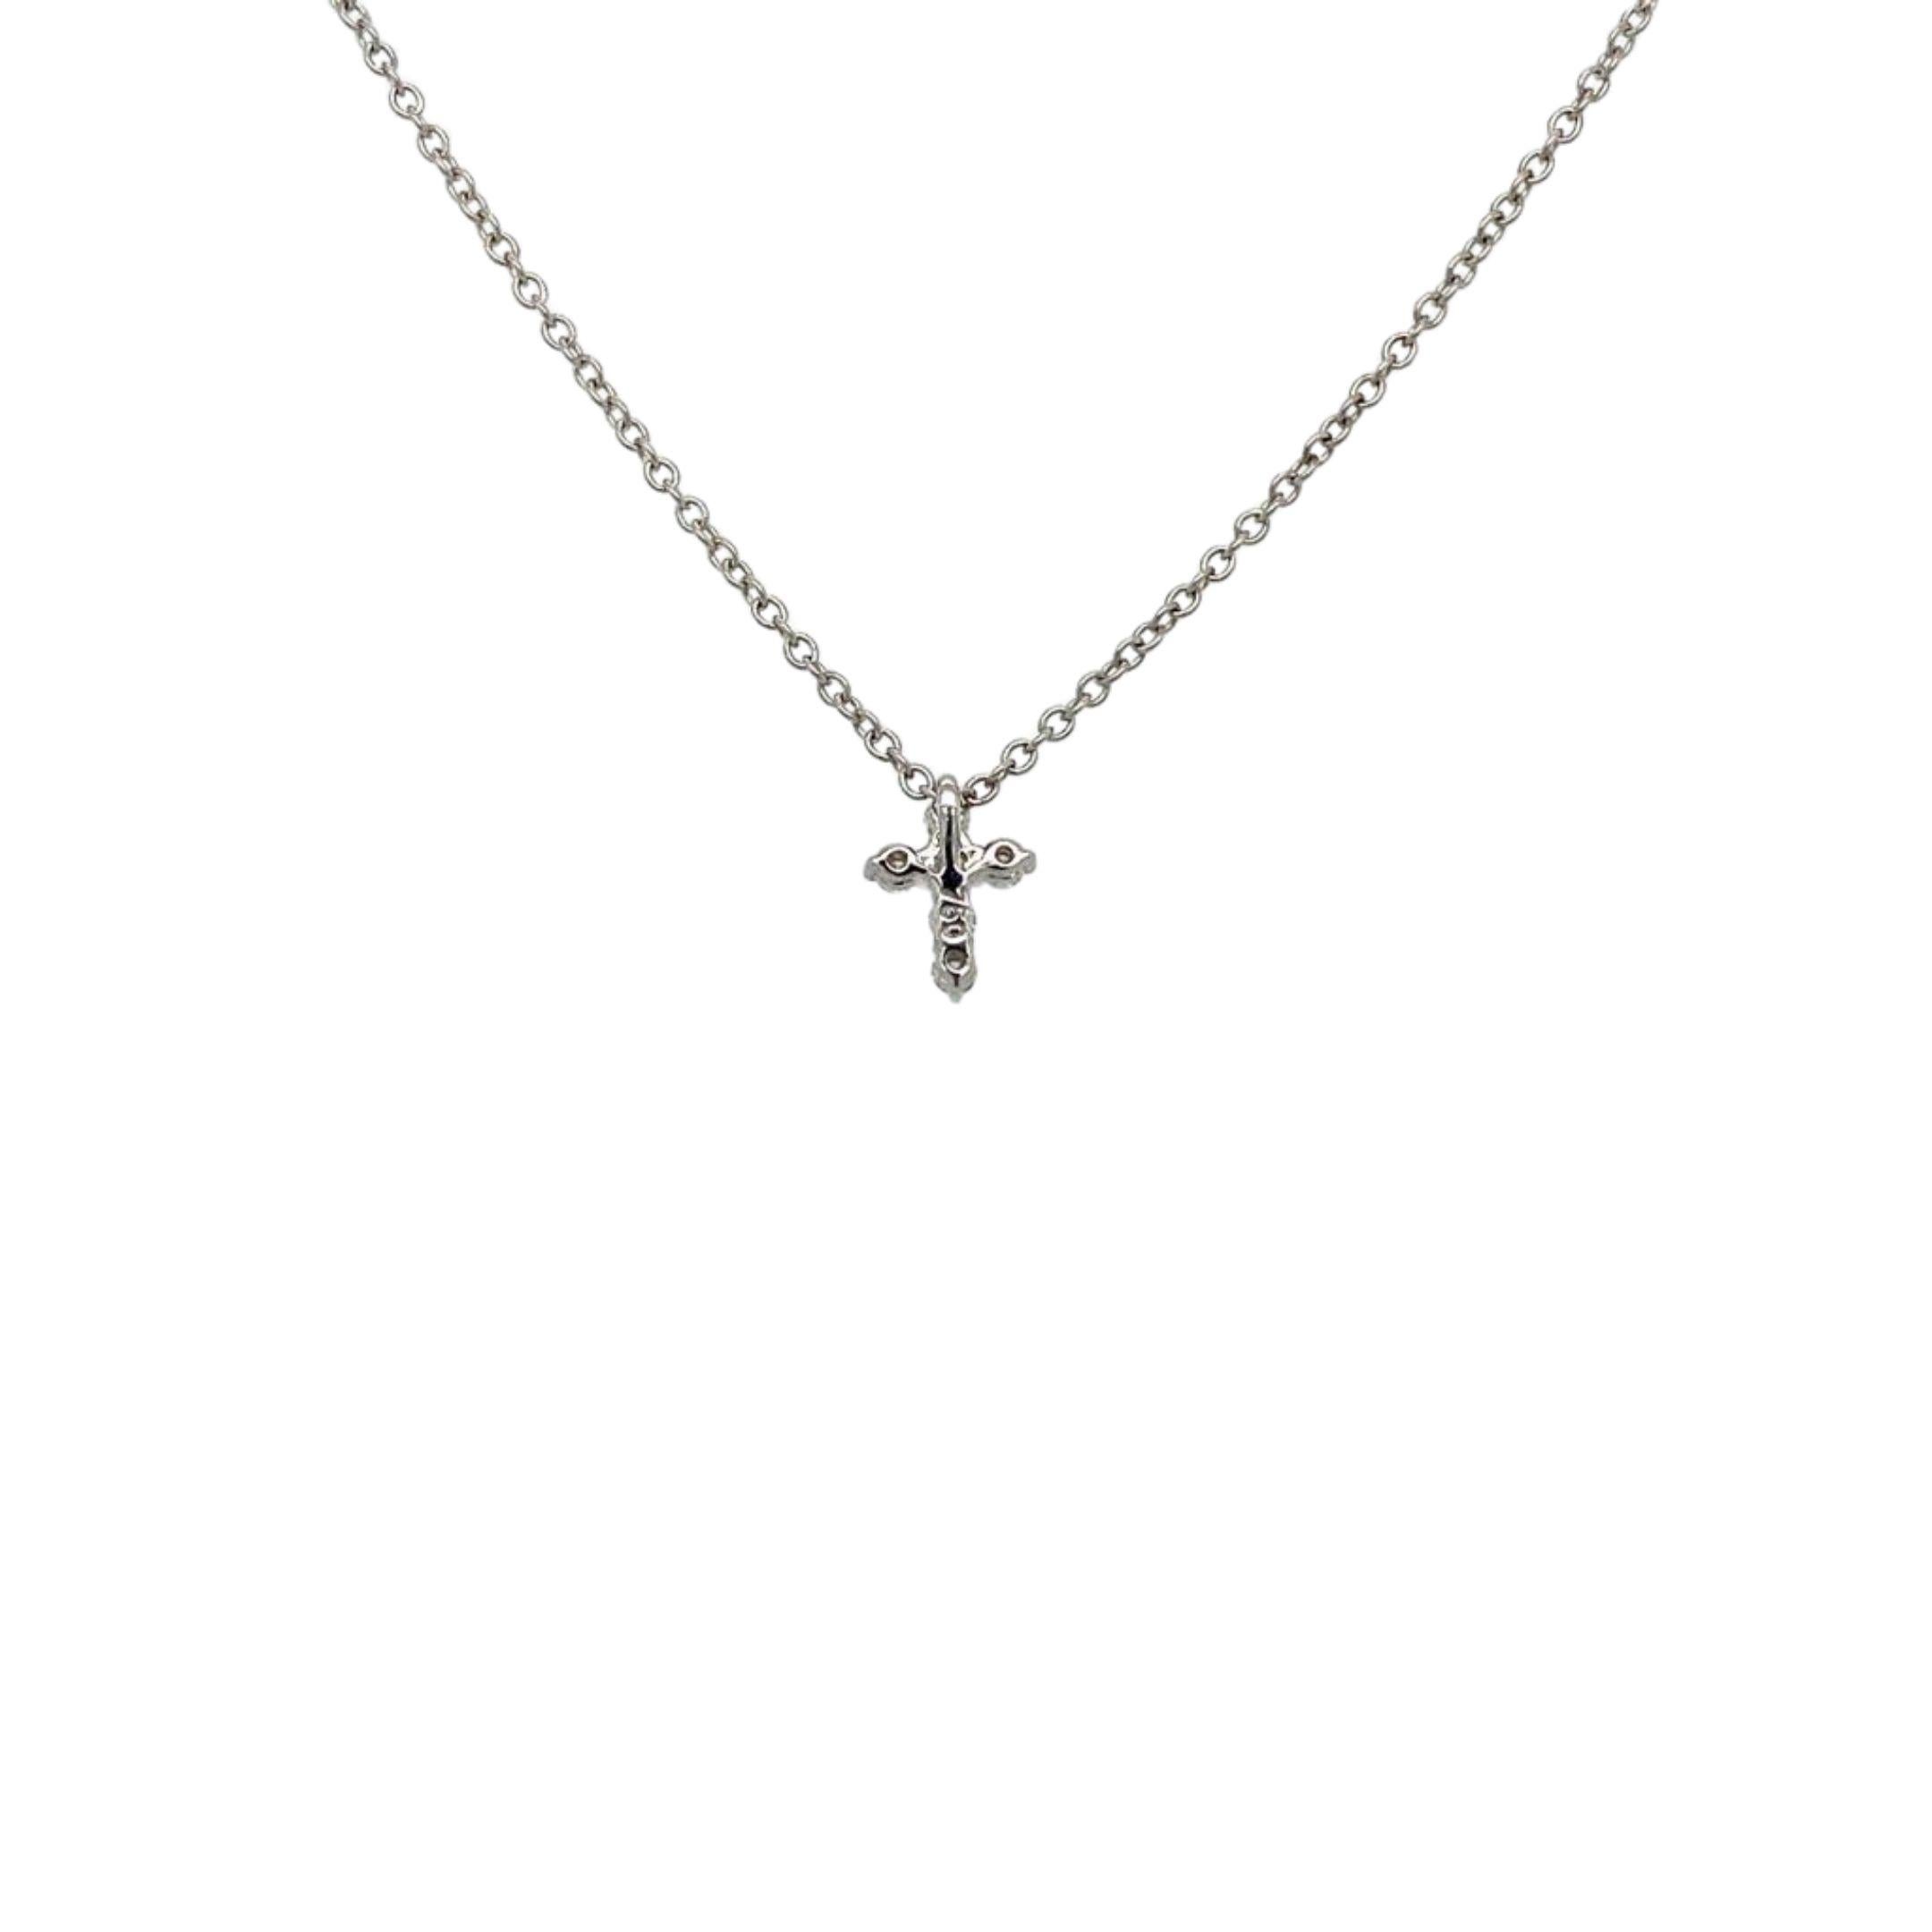 Cross Diamond Pendant Necklace made with real/natural brilliant cut  diamonds. Diamond Weight: 0.12 carats. Mounted on 18 karat white gold.